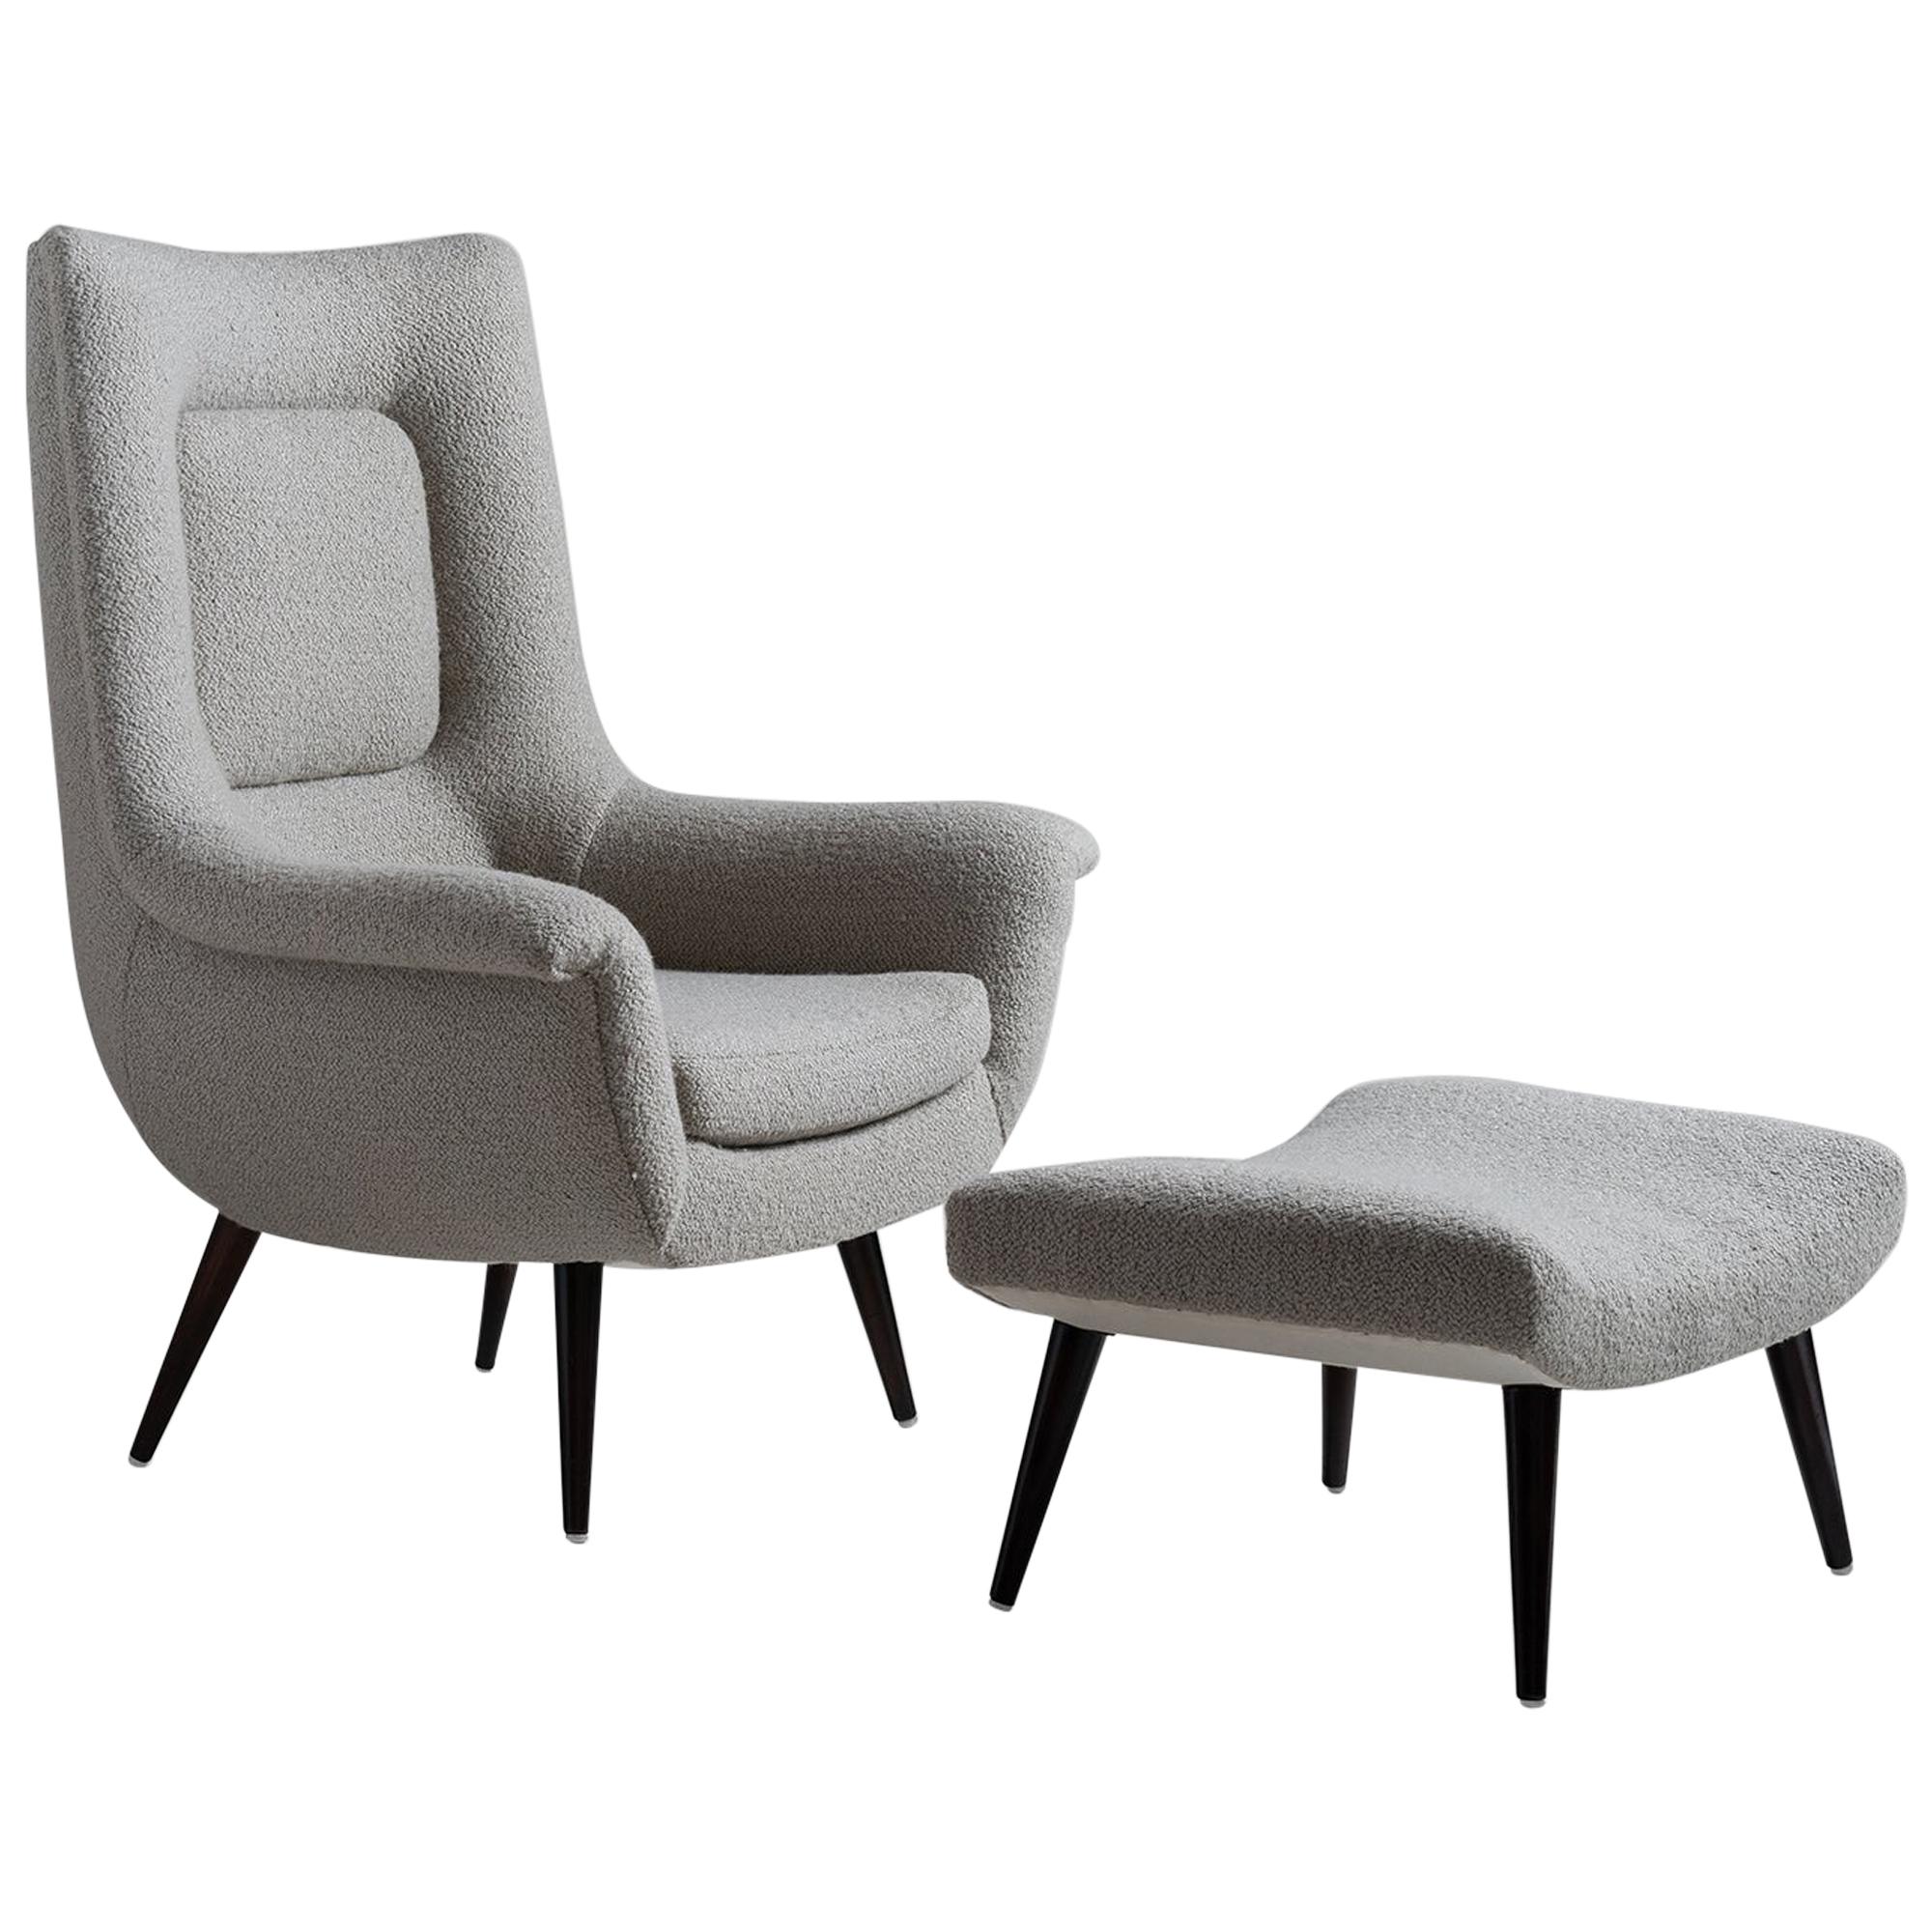 Lounge Chair and Ottoman by Lawrence Peabody in a Belgian Textured Wool Blend